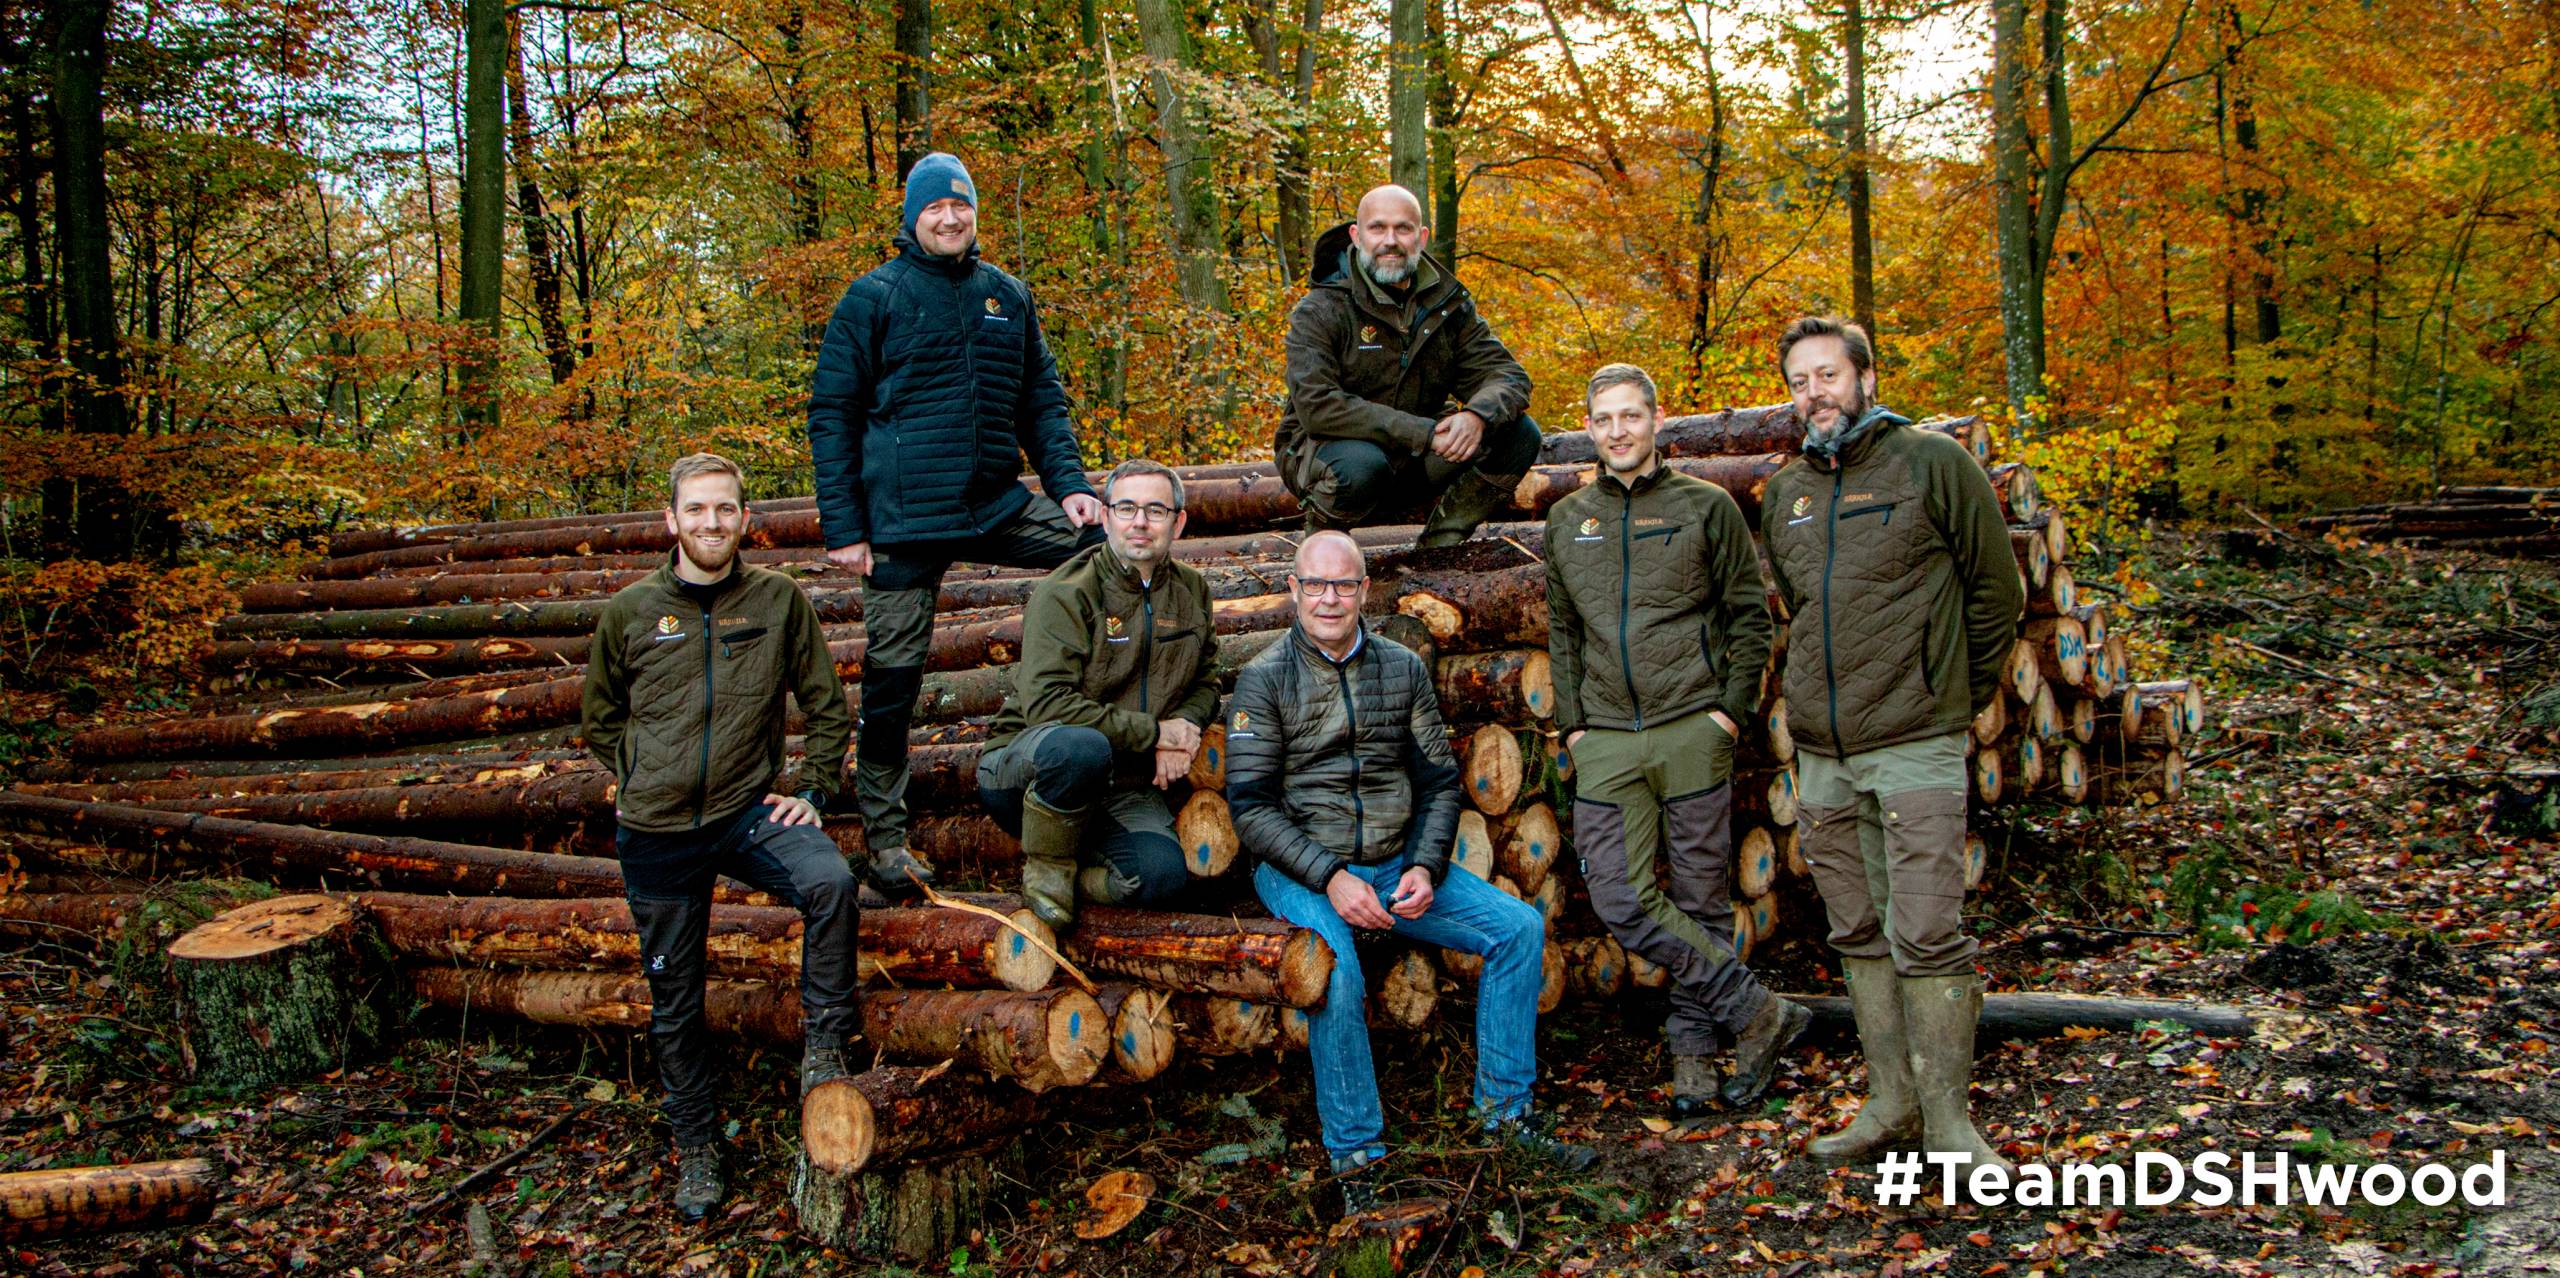 At DSHwood, we are driven by our passion for sustainable forestry